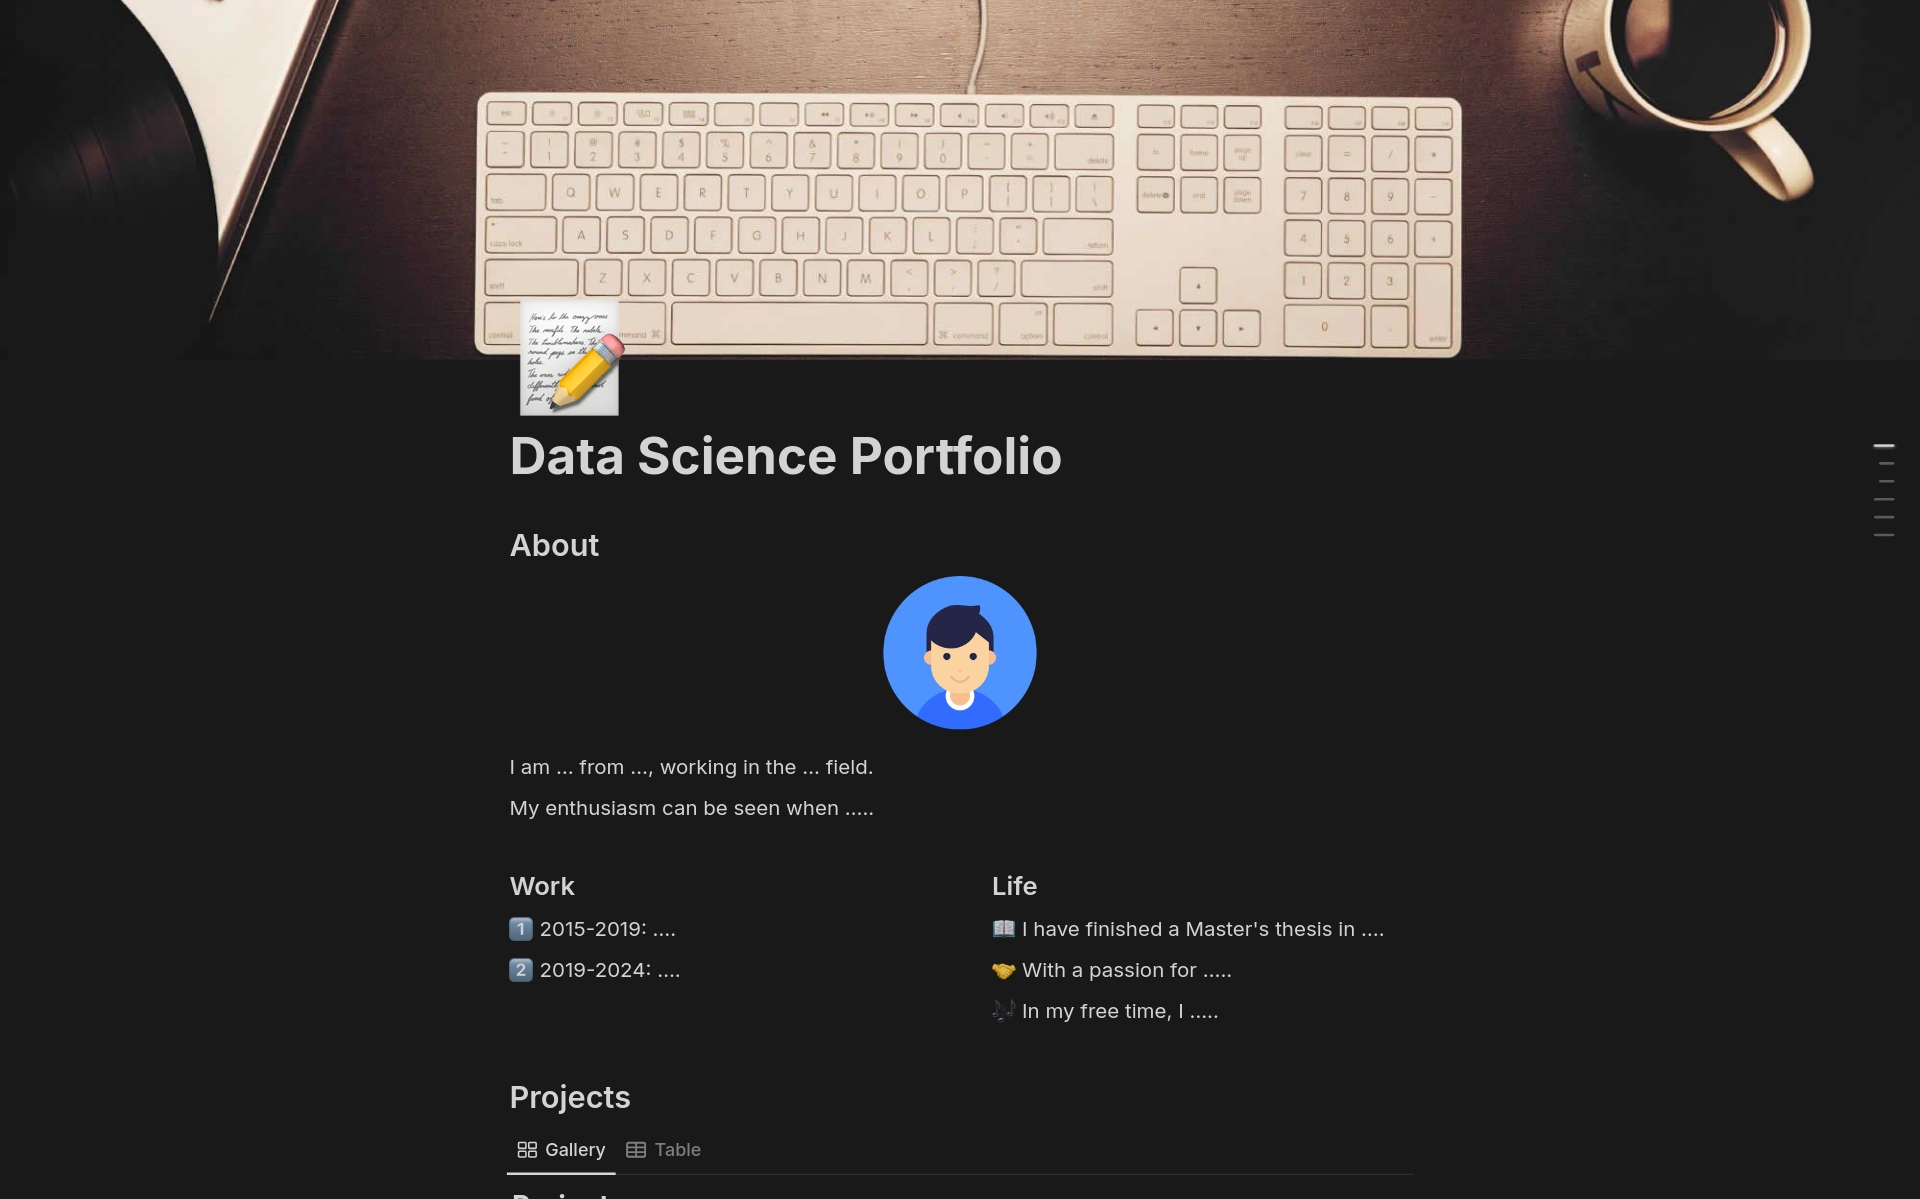 Our Notion template helps you build a professional data science portfolio by providing customizable sections to showcase your projects, skills, and achievements, making it easier to impress potential employers.